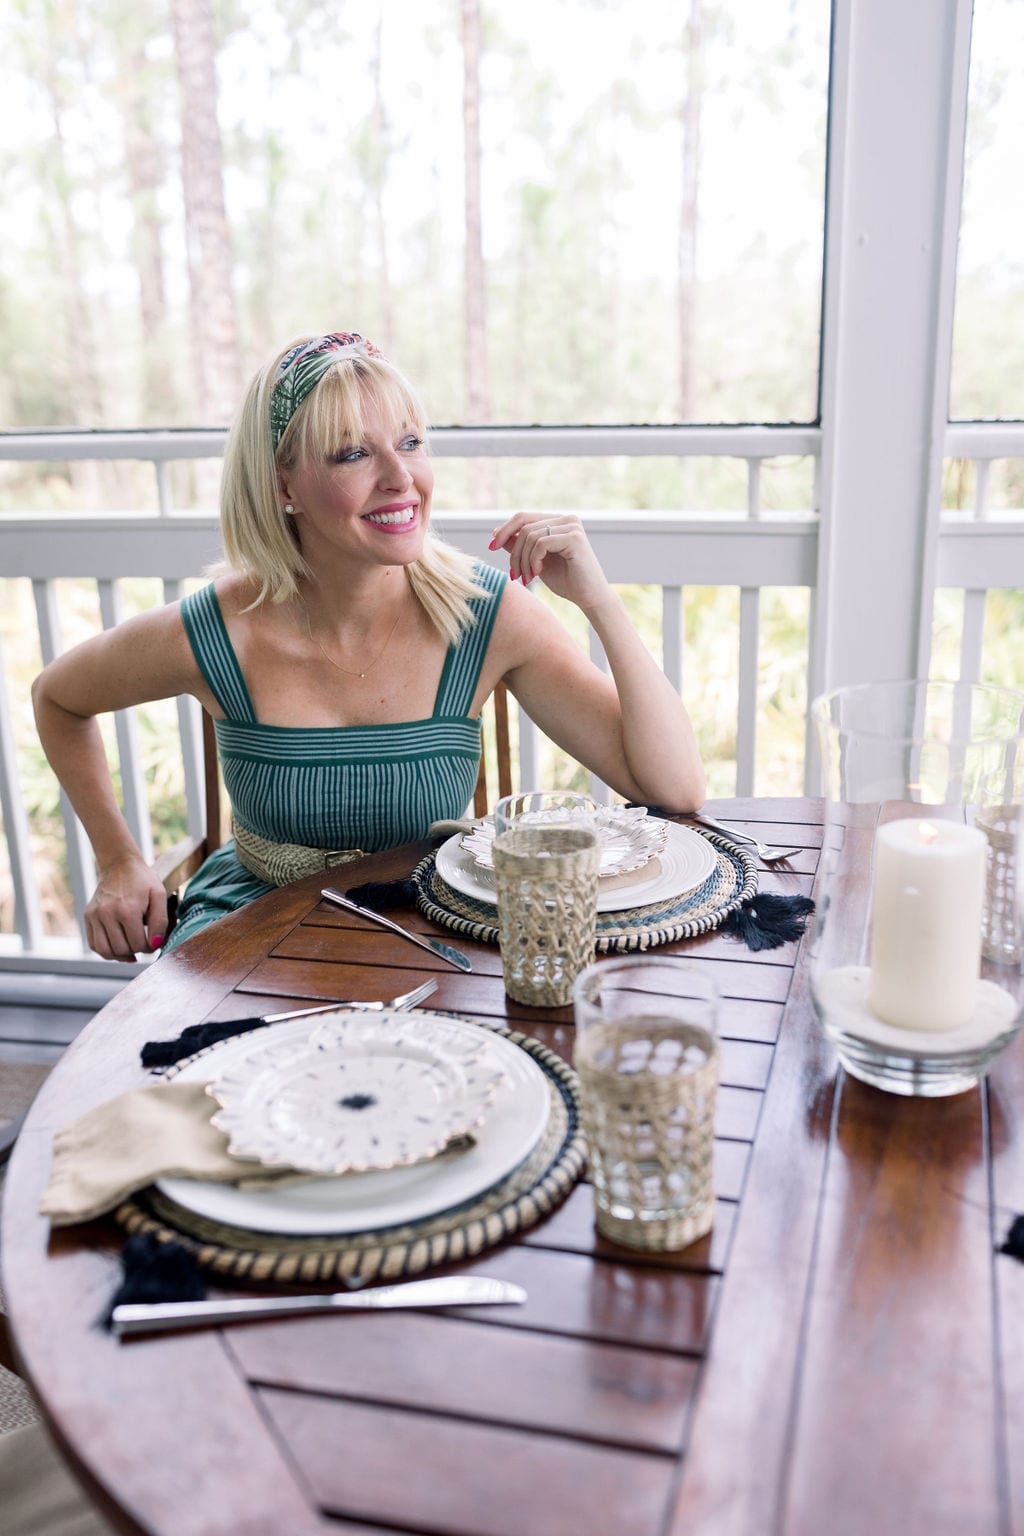 Table settings with round placemats for outdoor coastal glam table setting with accents of wicker, black and gold.